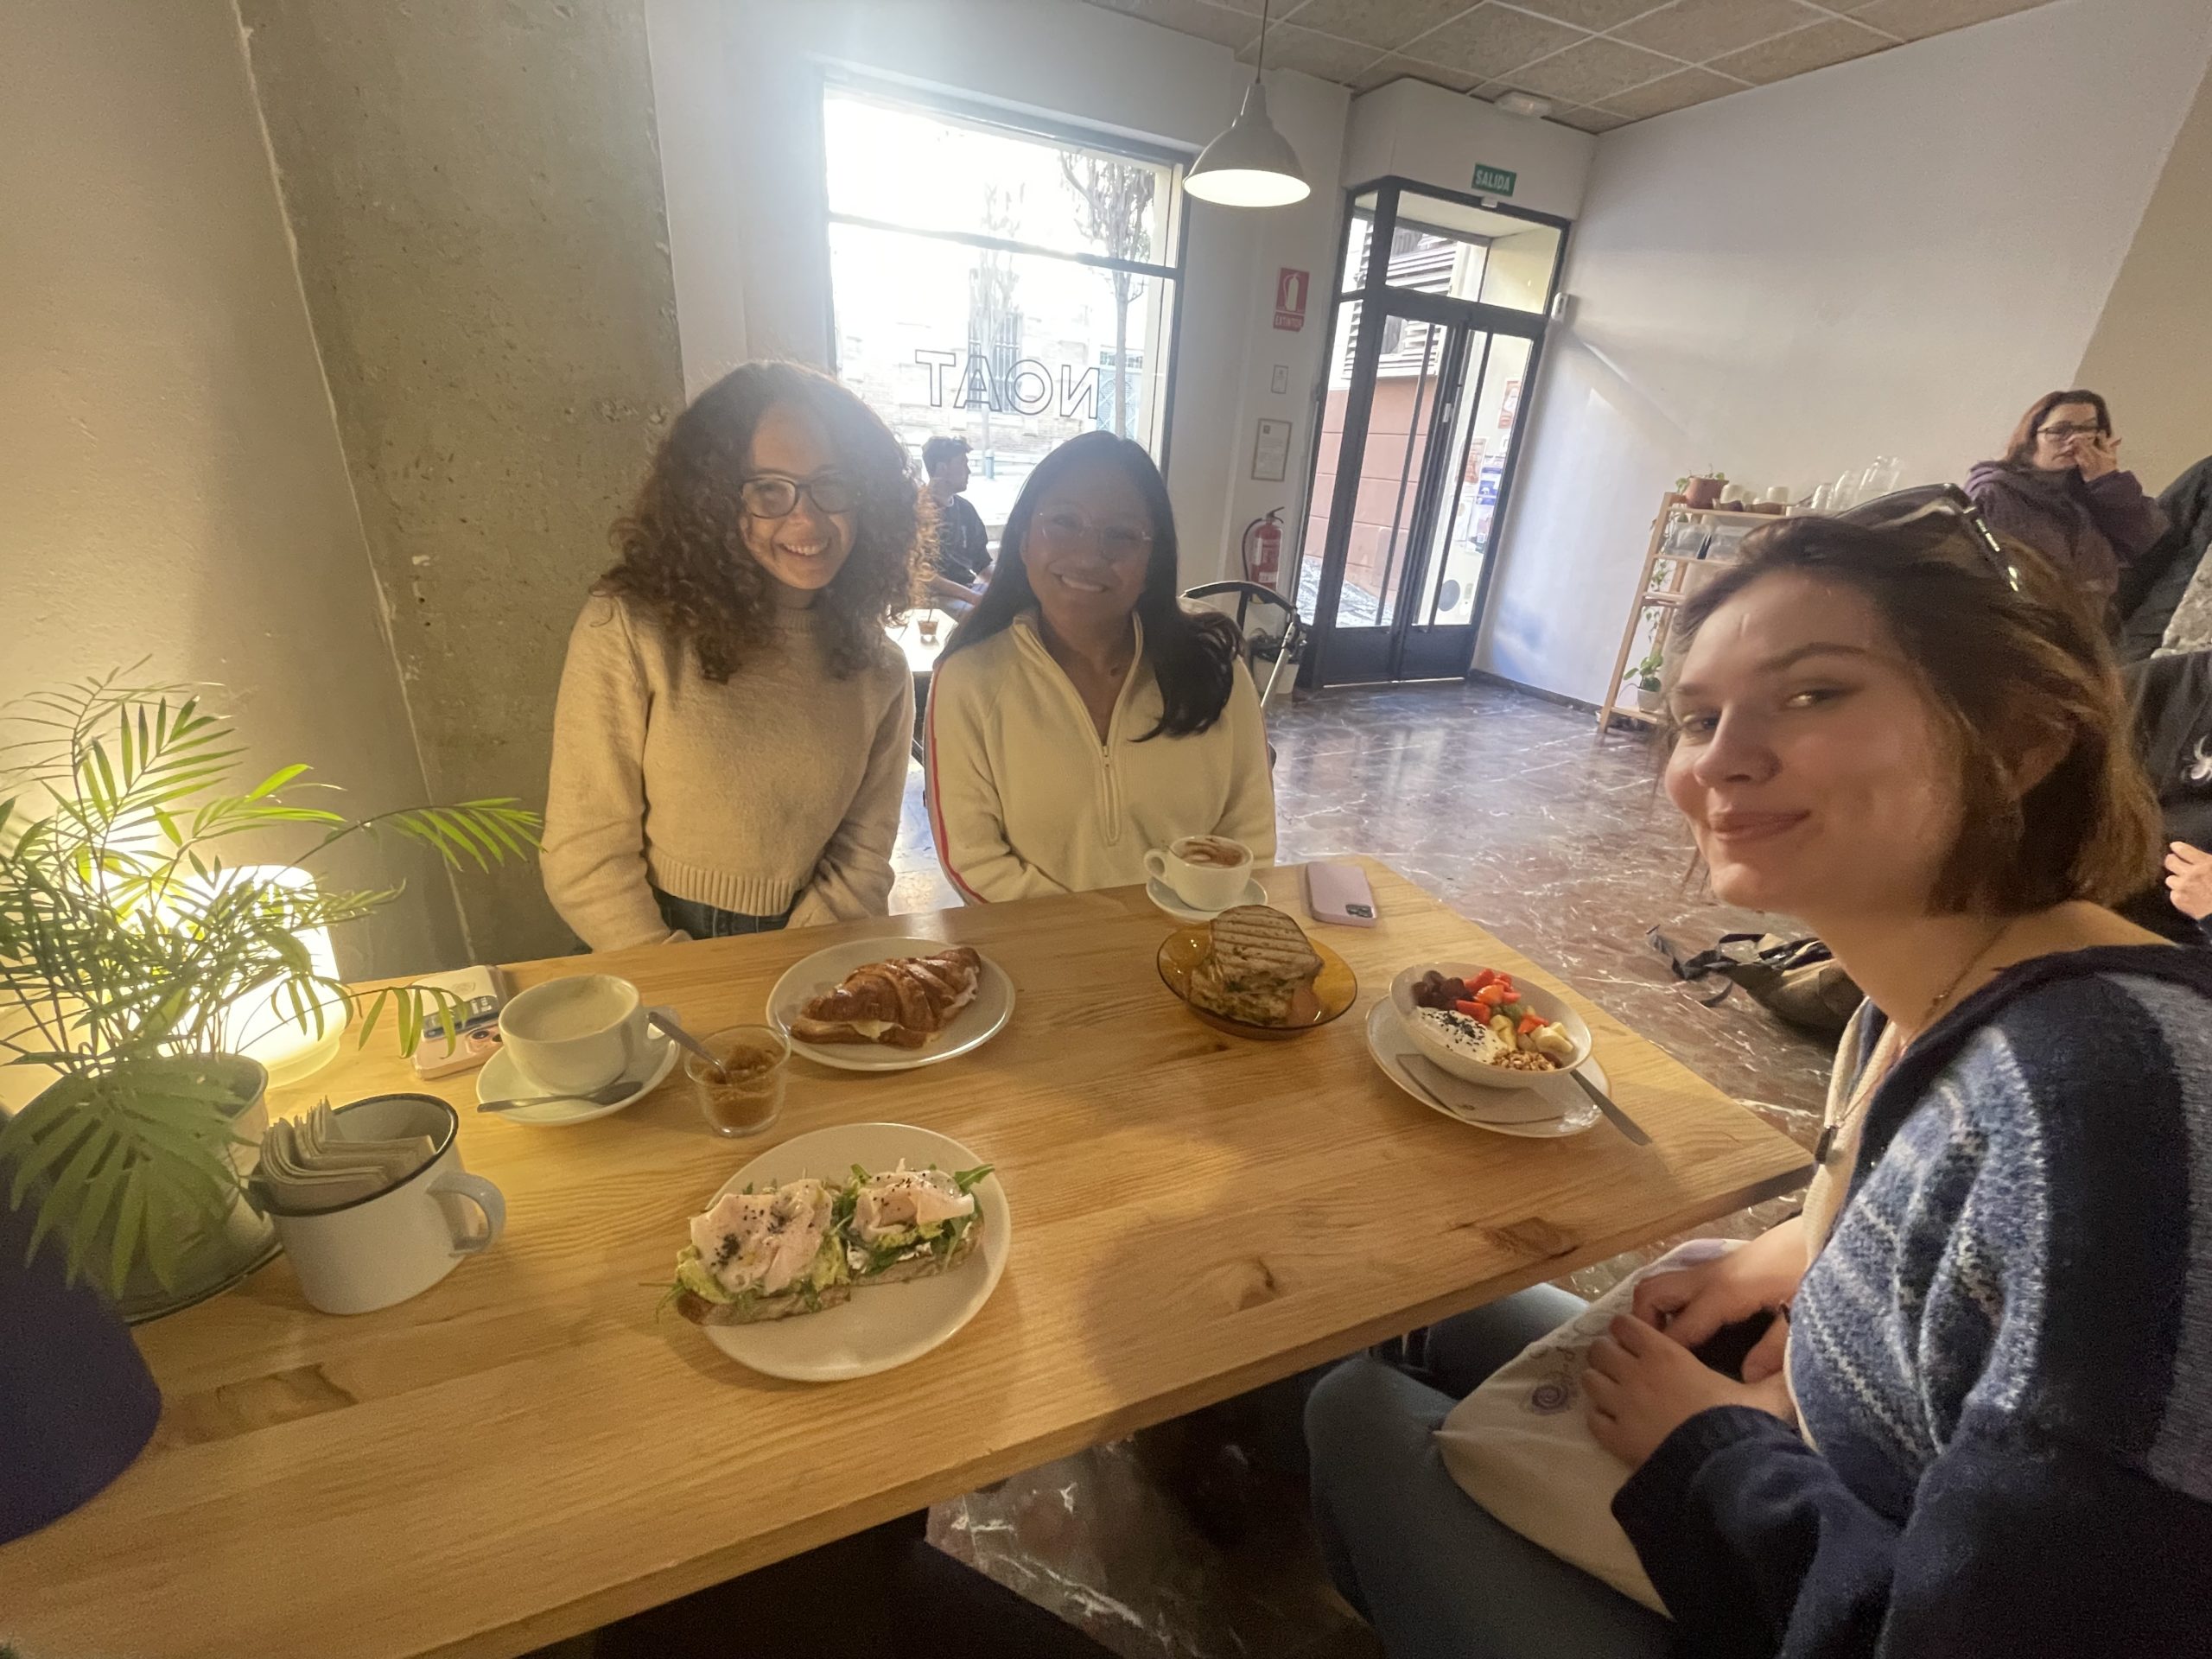 A table with four plates of food and three girls smiling.